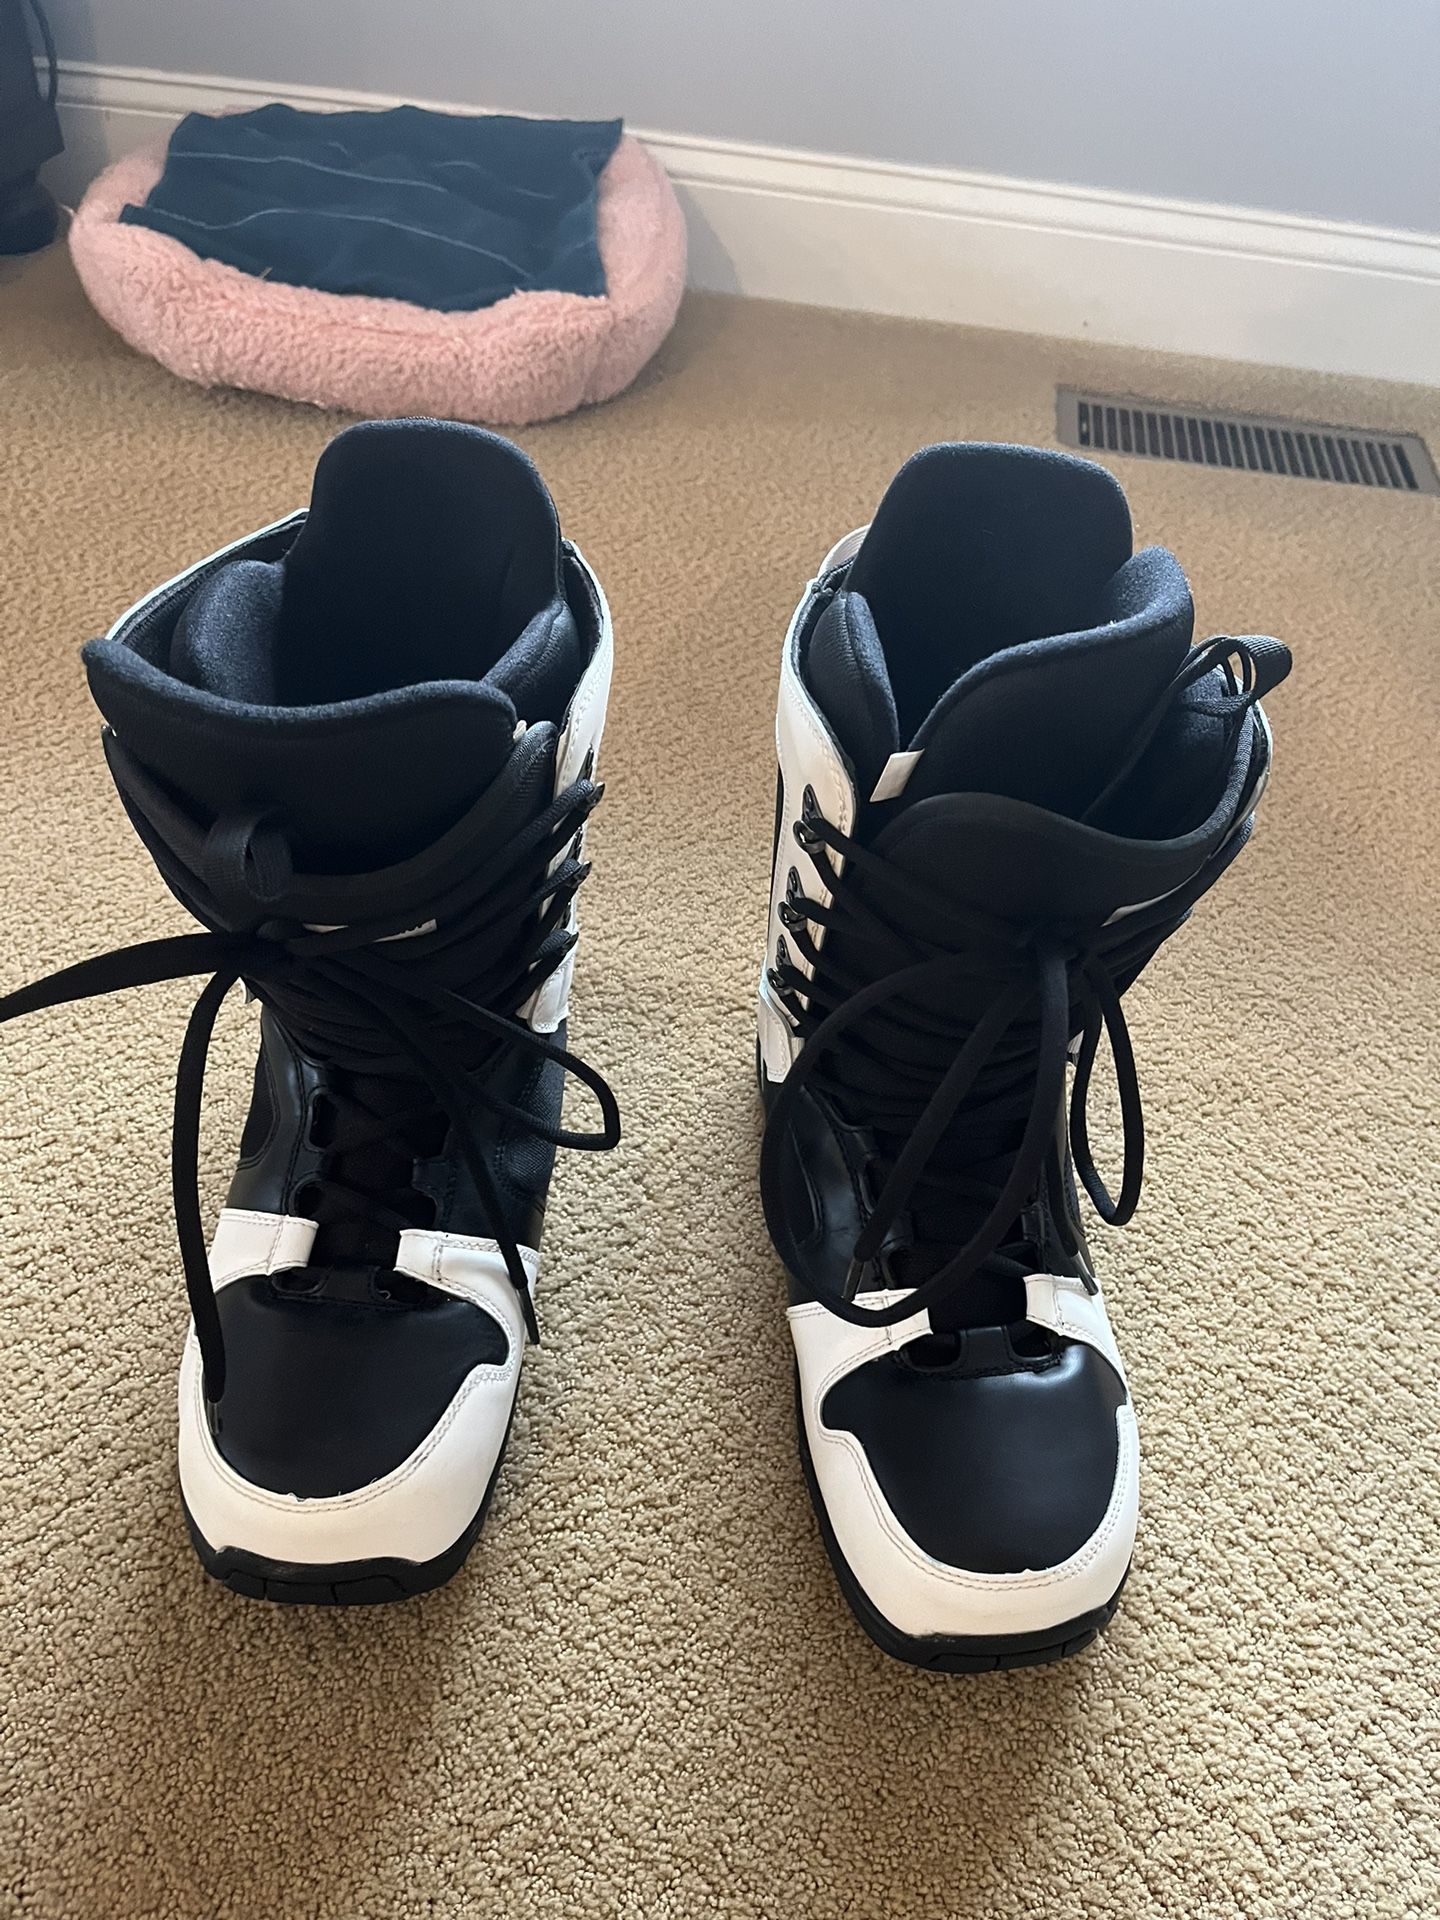 Syst3m Snowboard boots